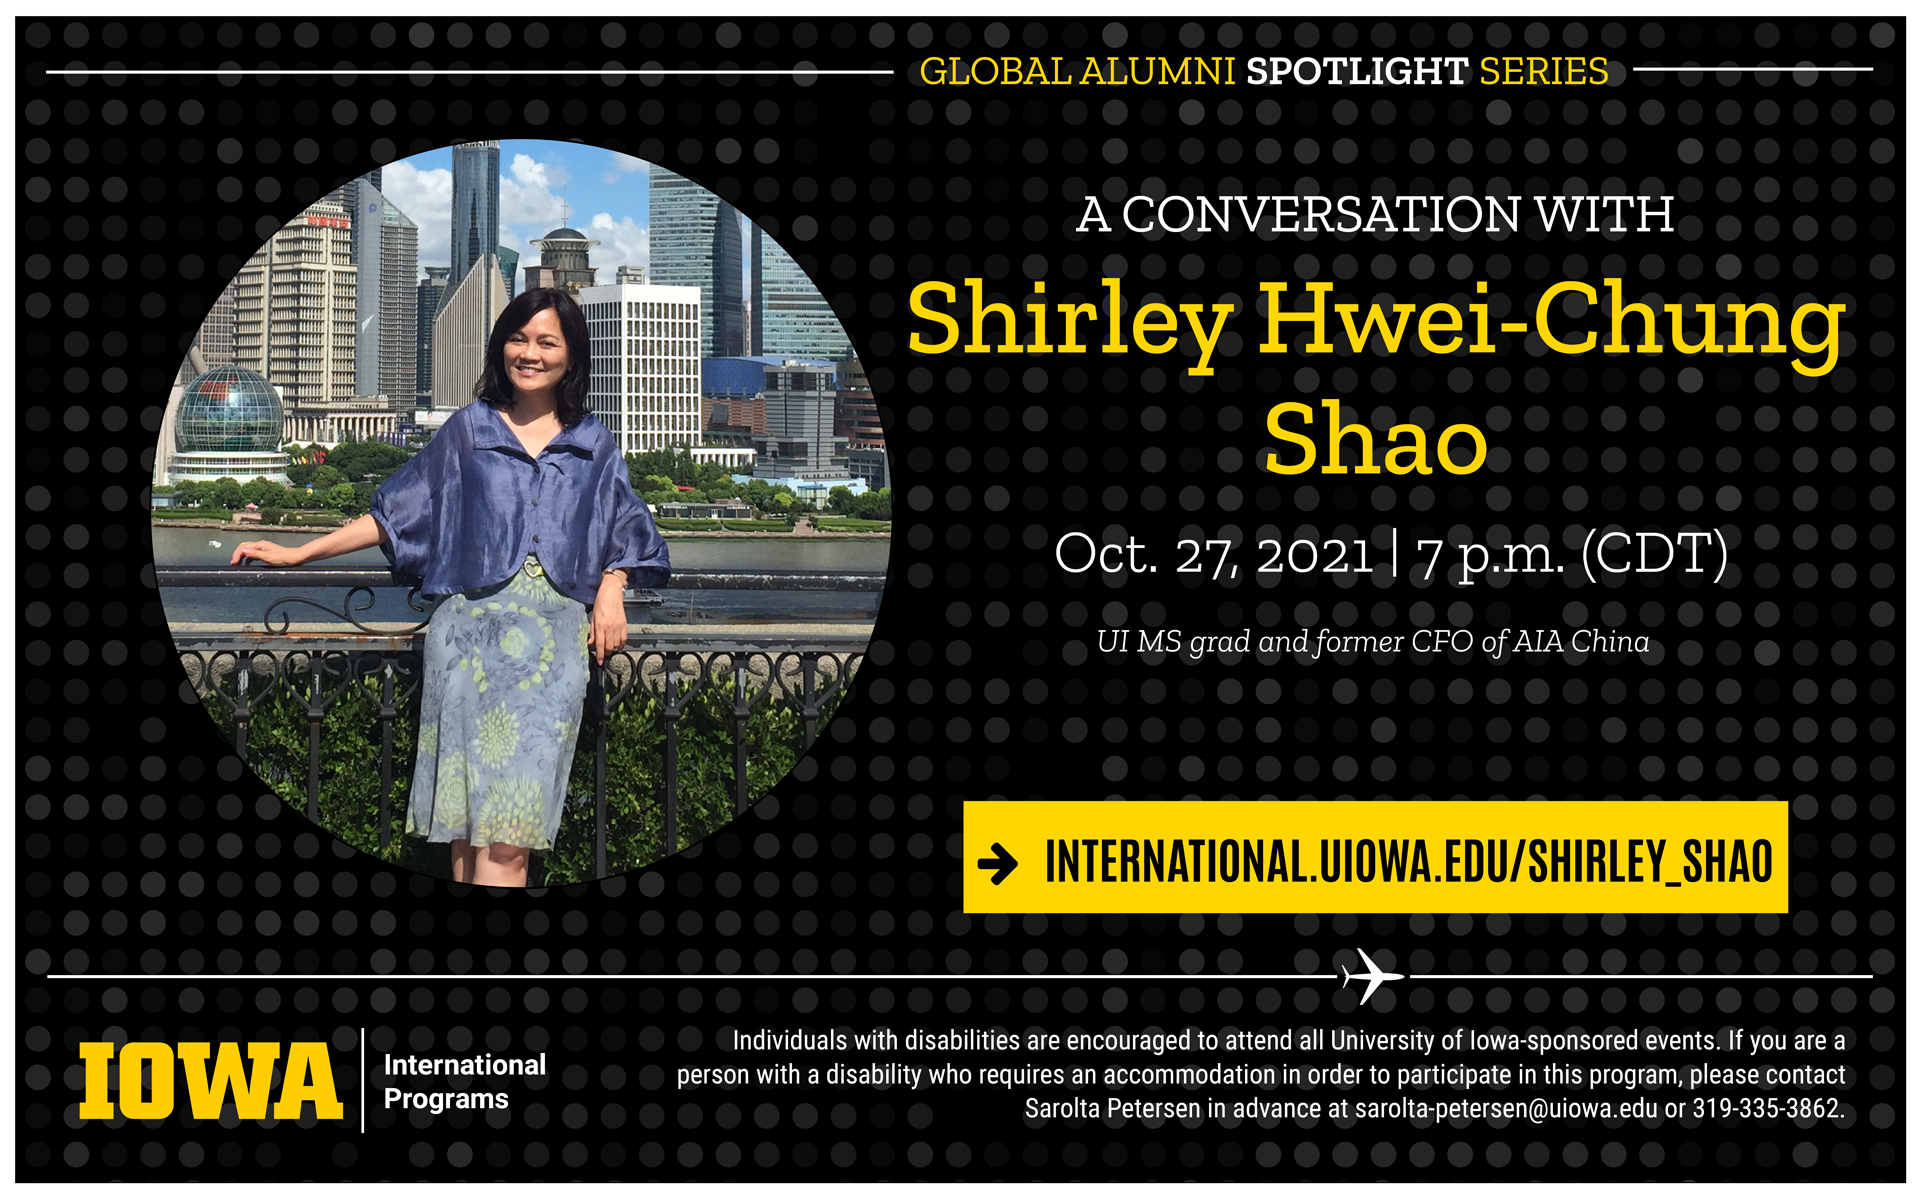 global alumni spotlight series presents a conversation with Shirley Hwei-Chung Shao on October 27, 2021 at 7 p m CDT UI MS grad and former CFO of AIA China. go to international.uiowa.edu/shirley_shao for more information.